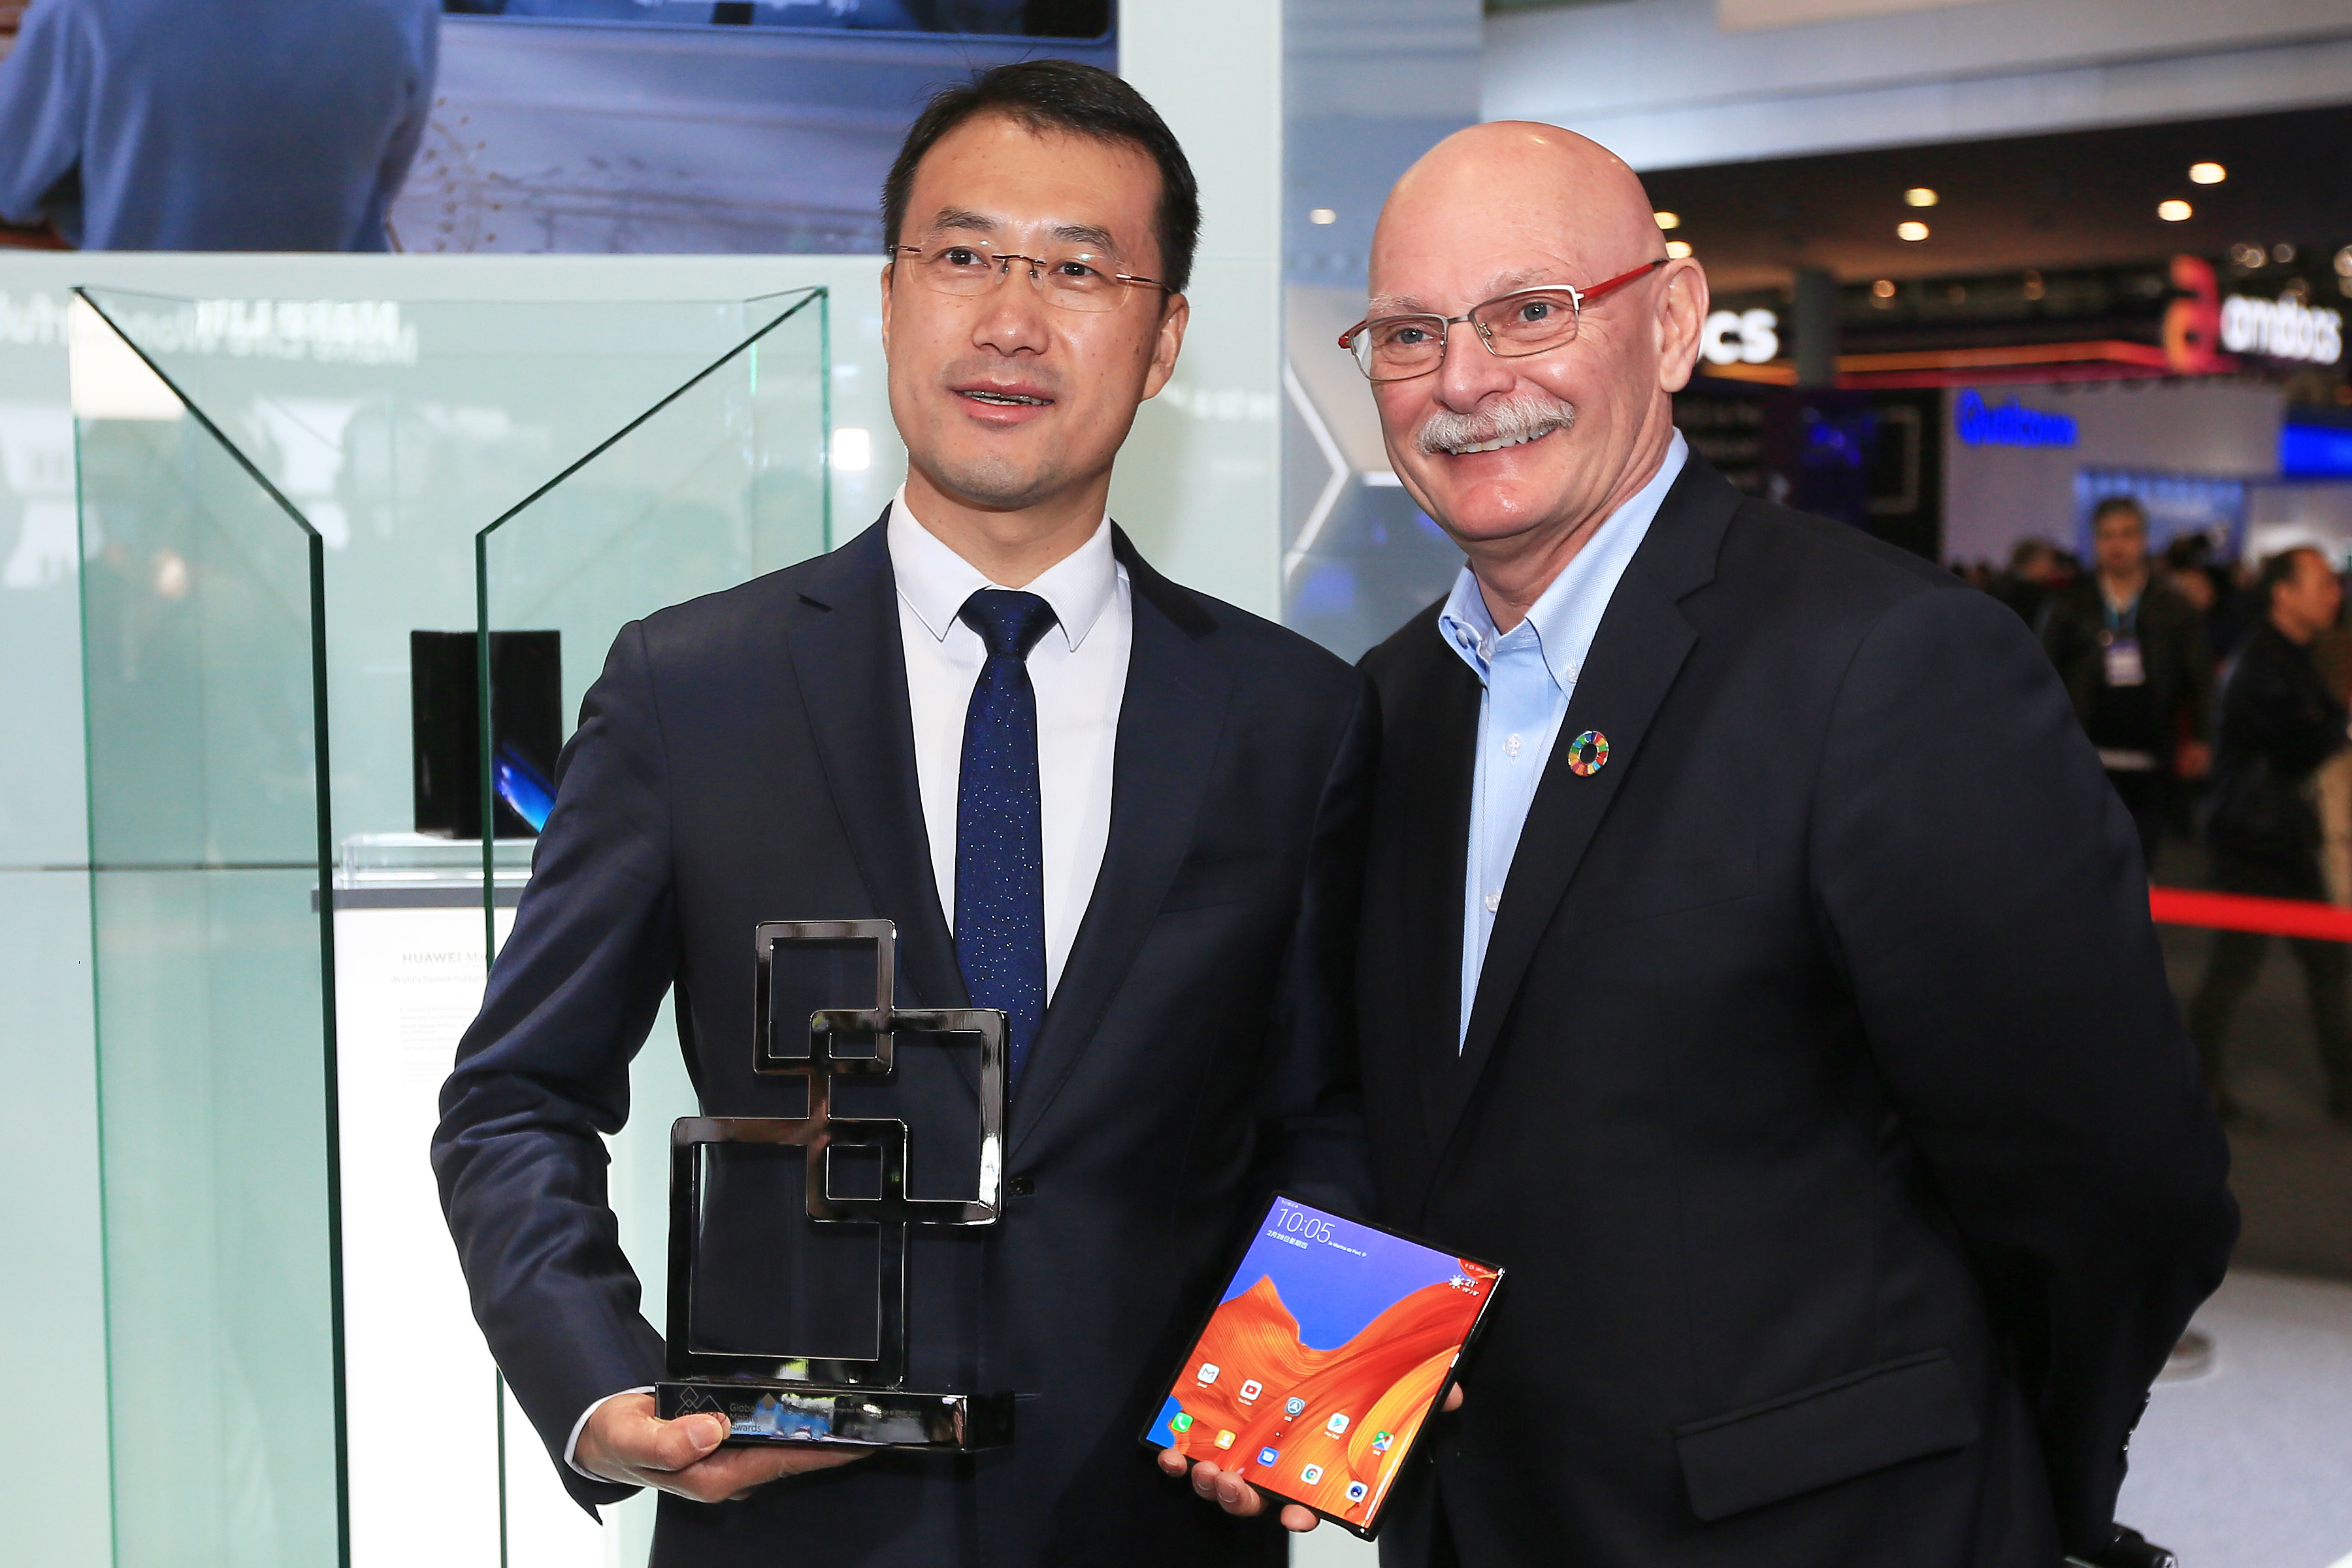 HUAWEI Mate X Wins GLOMO Award for Best New Connected Mobile Device at MWC19 Barcelona  